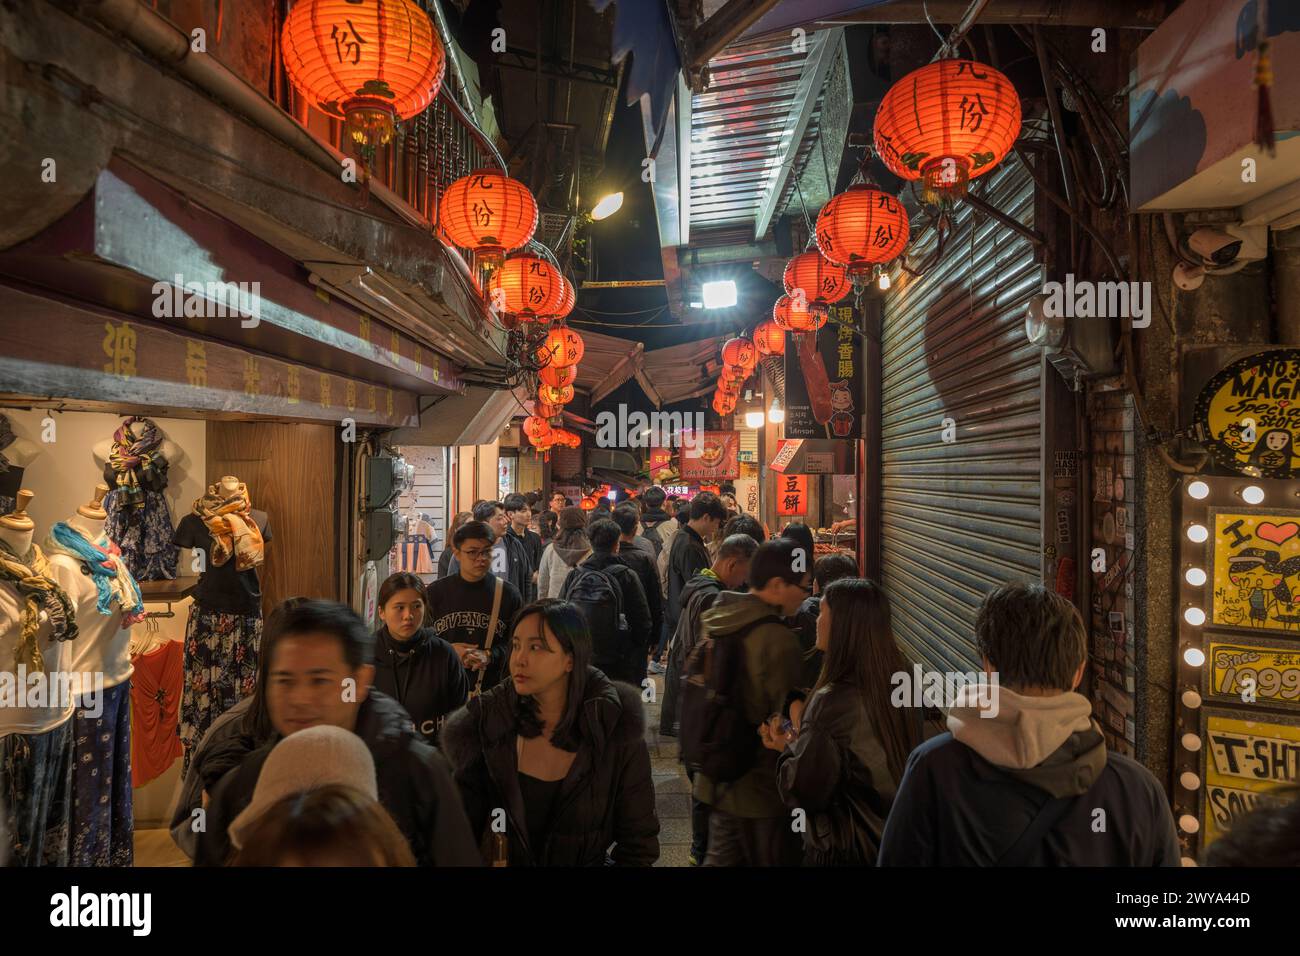 A crowded Jiufen night market lit by red lanterns with shops and people Stock Photo